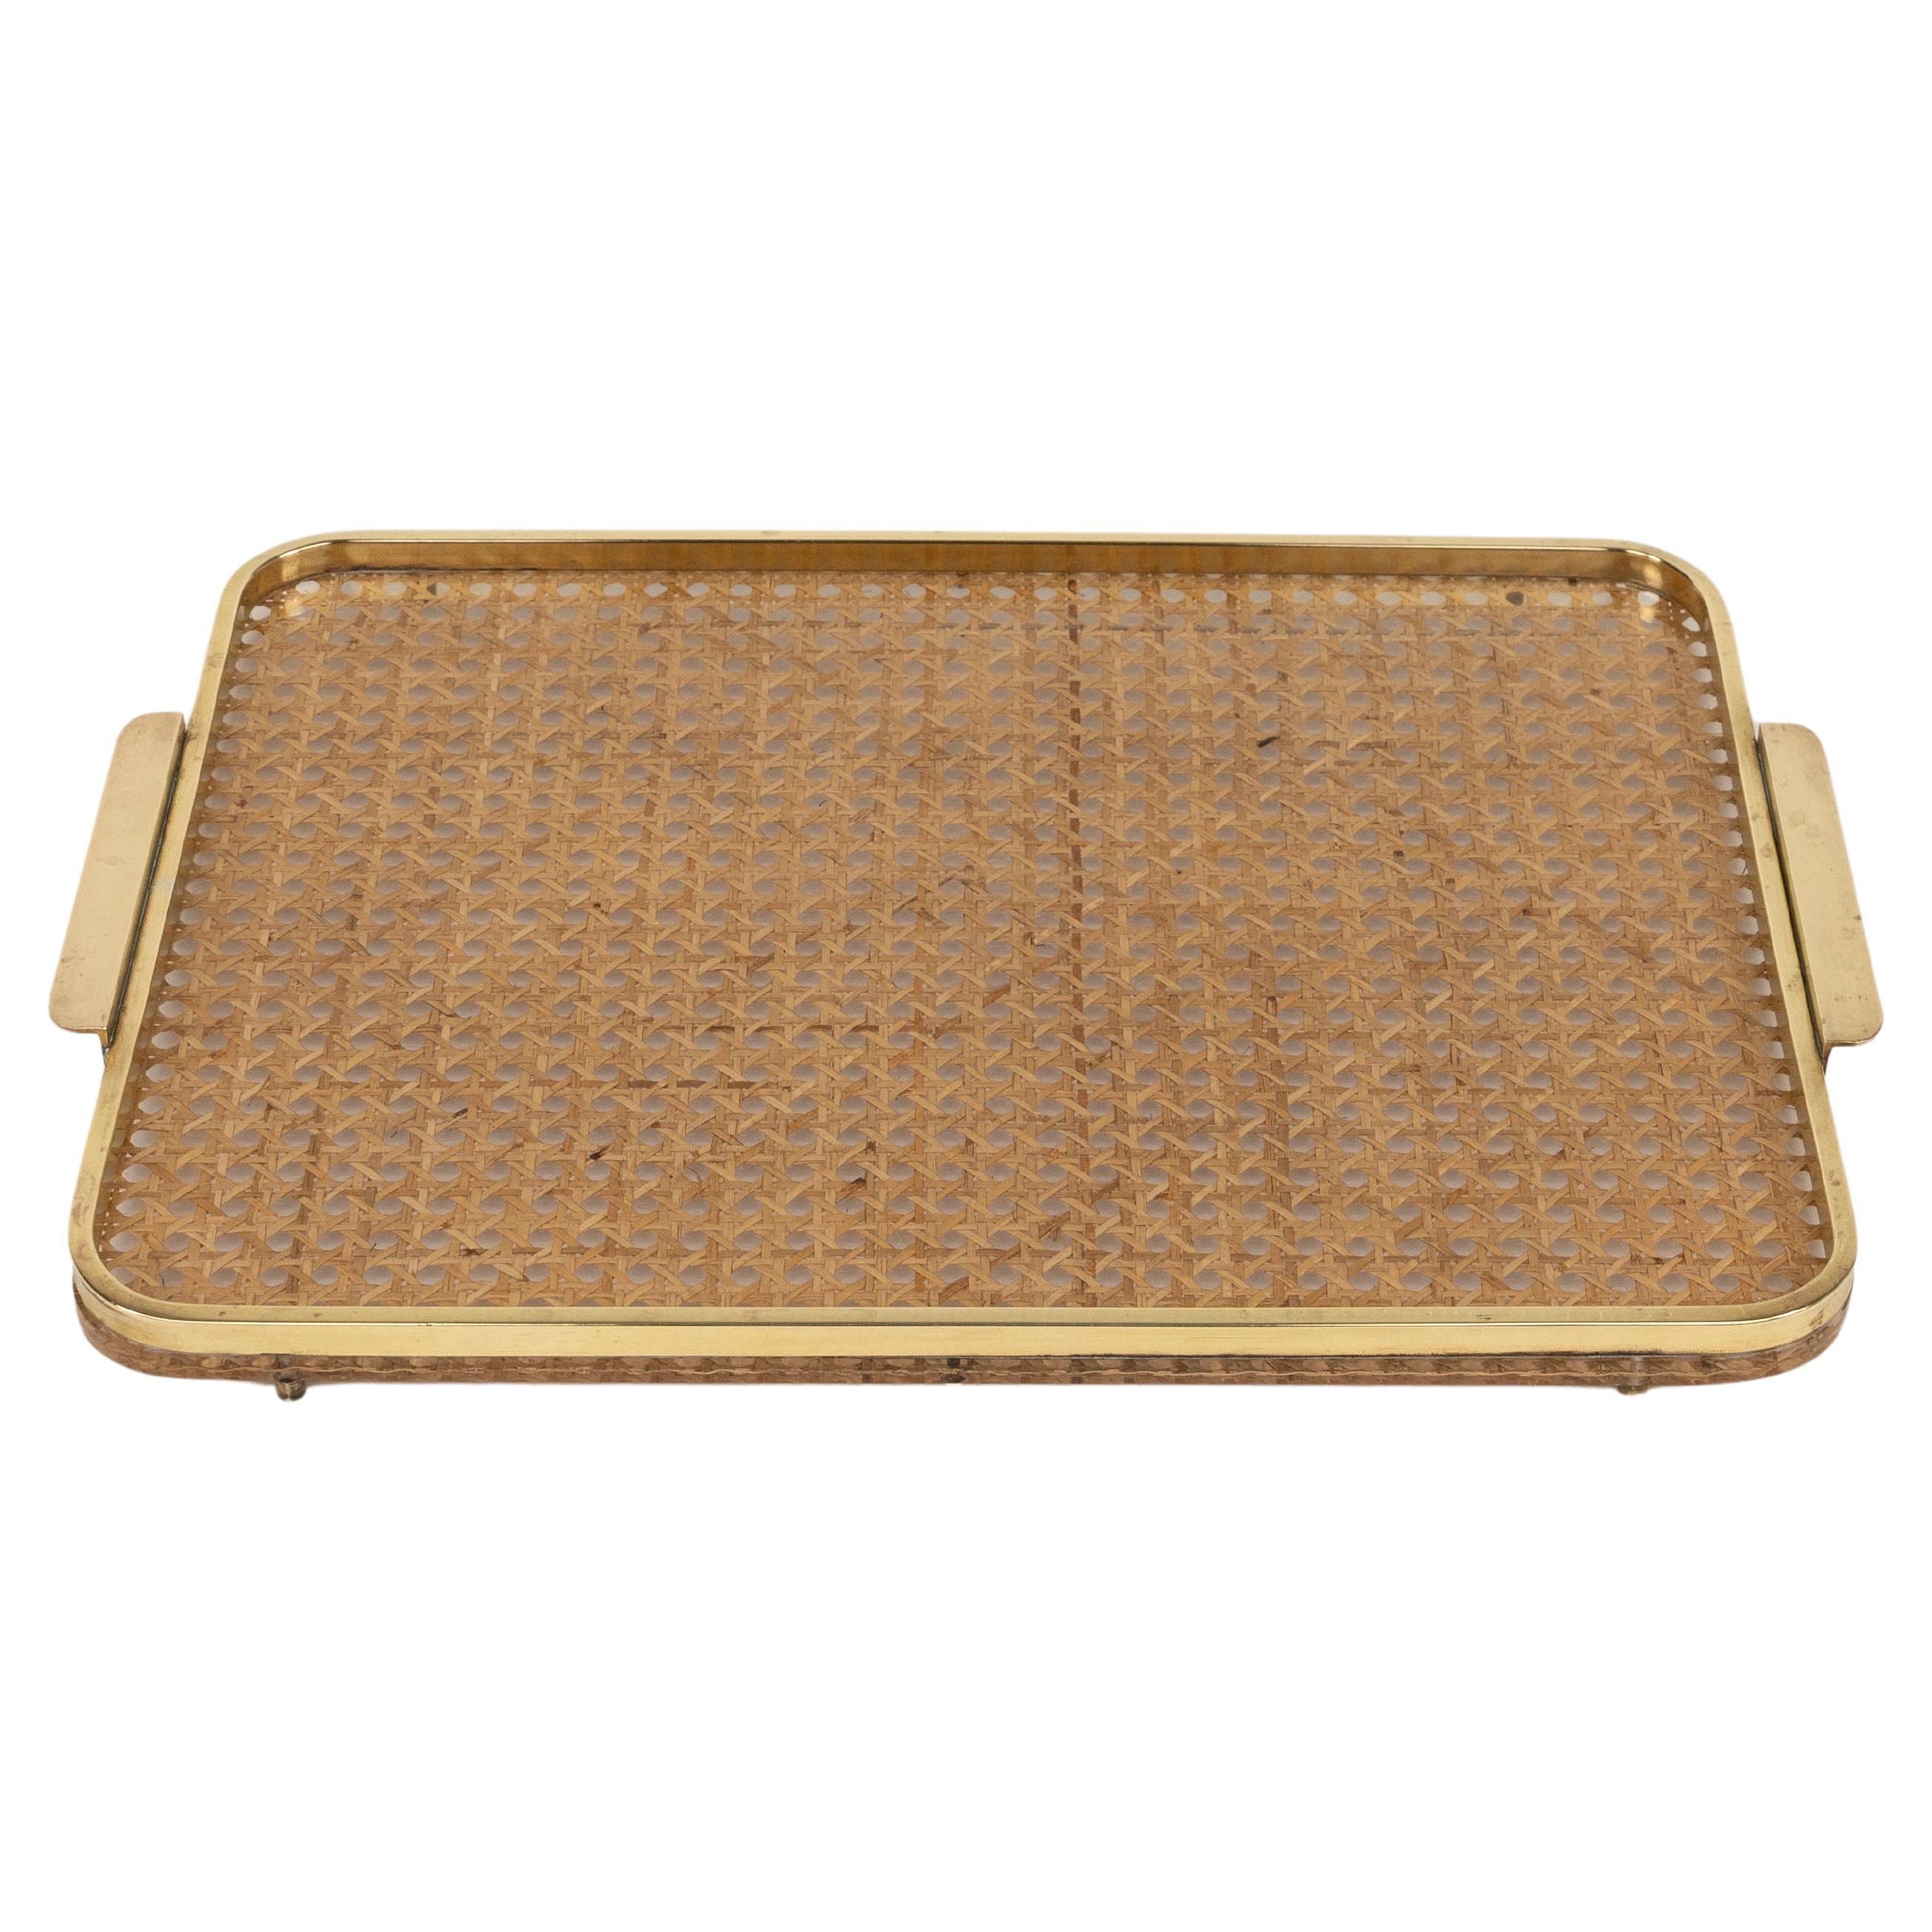 Serving Tray in Lucite, Rattan and Brass Christian Dior Style, Italy, 1970s For Sale